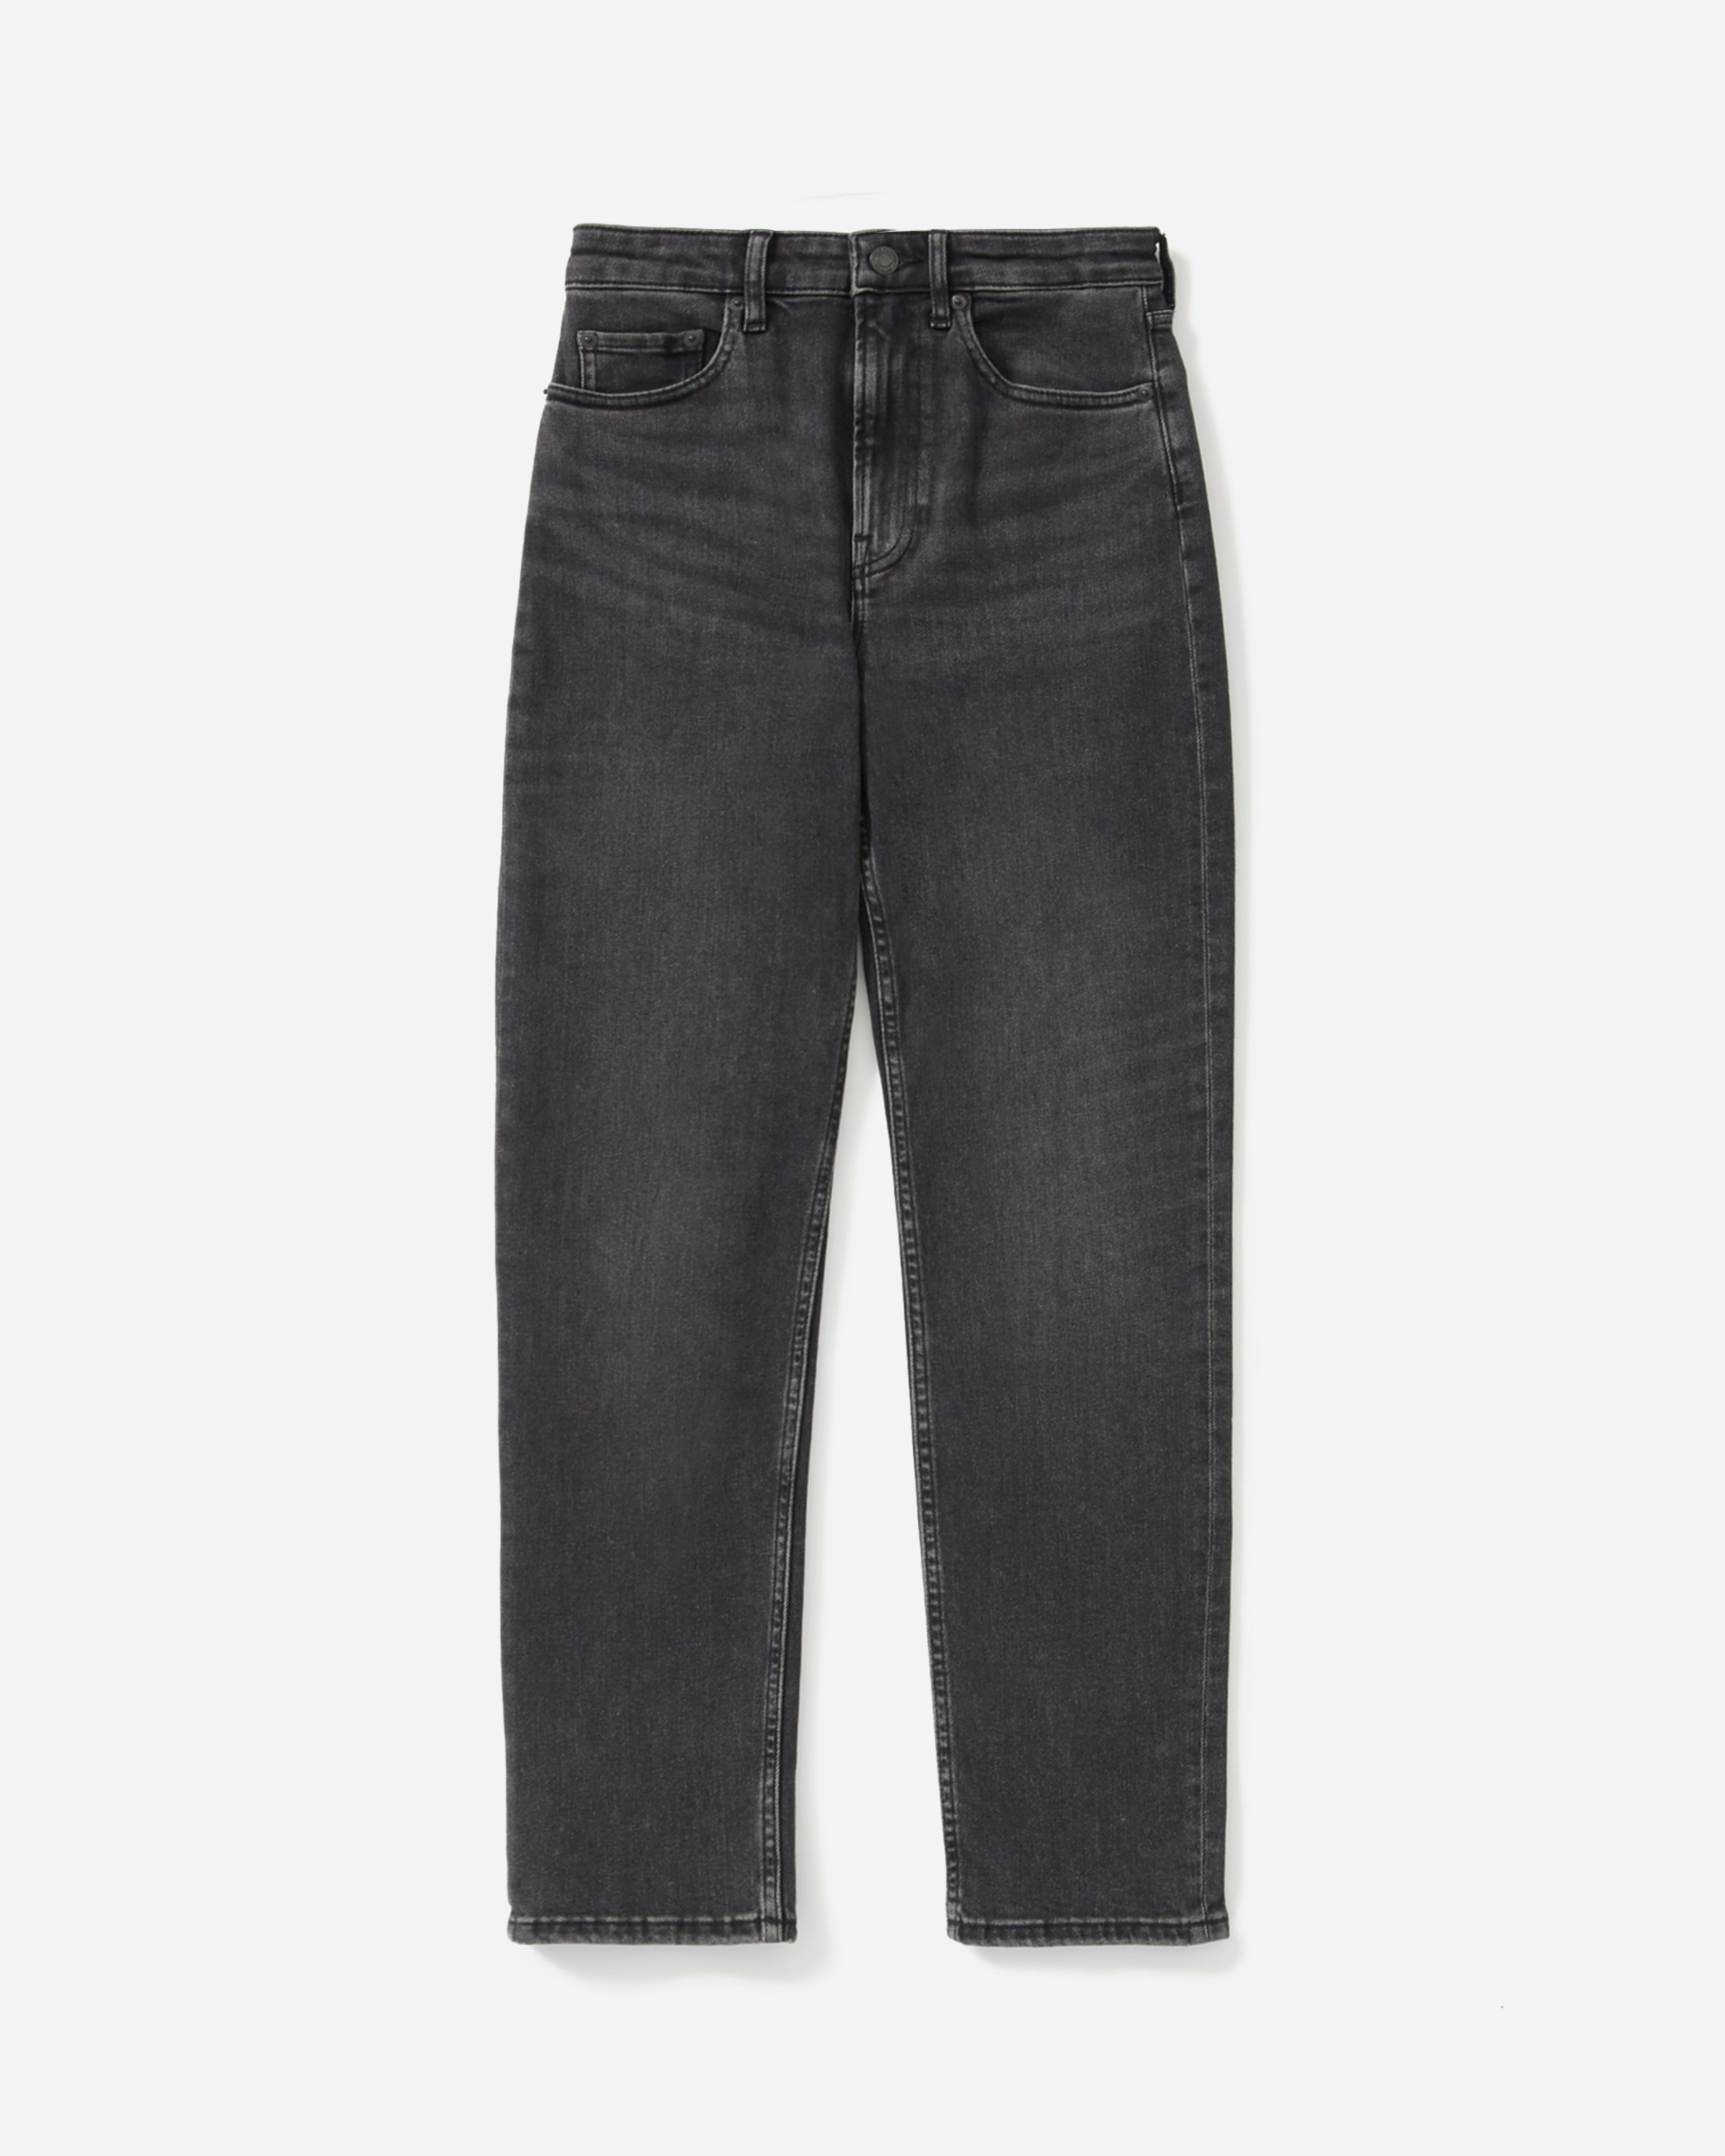 The Super-Straight Jean Washed Black – Everlane